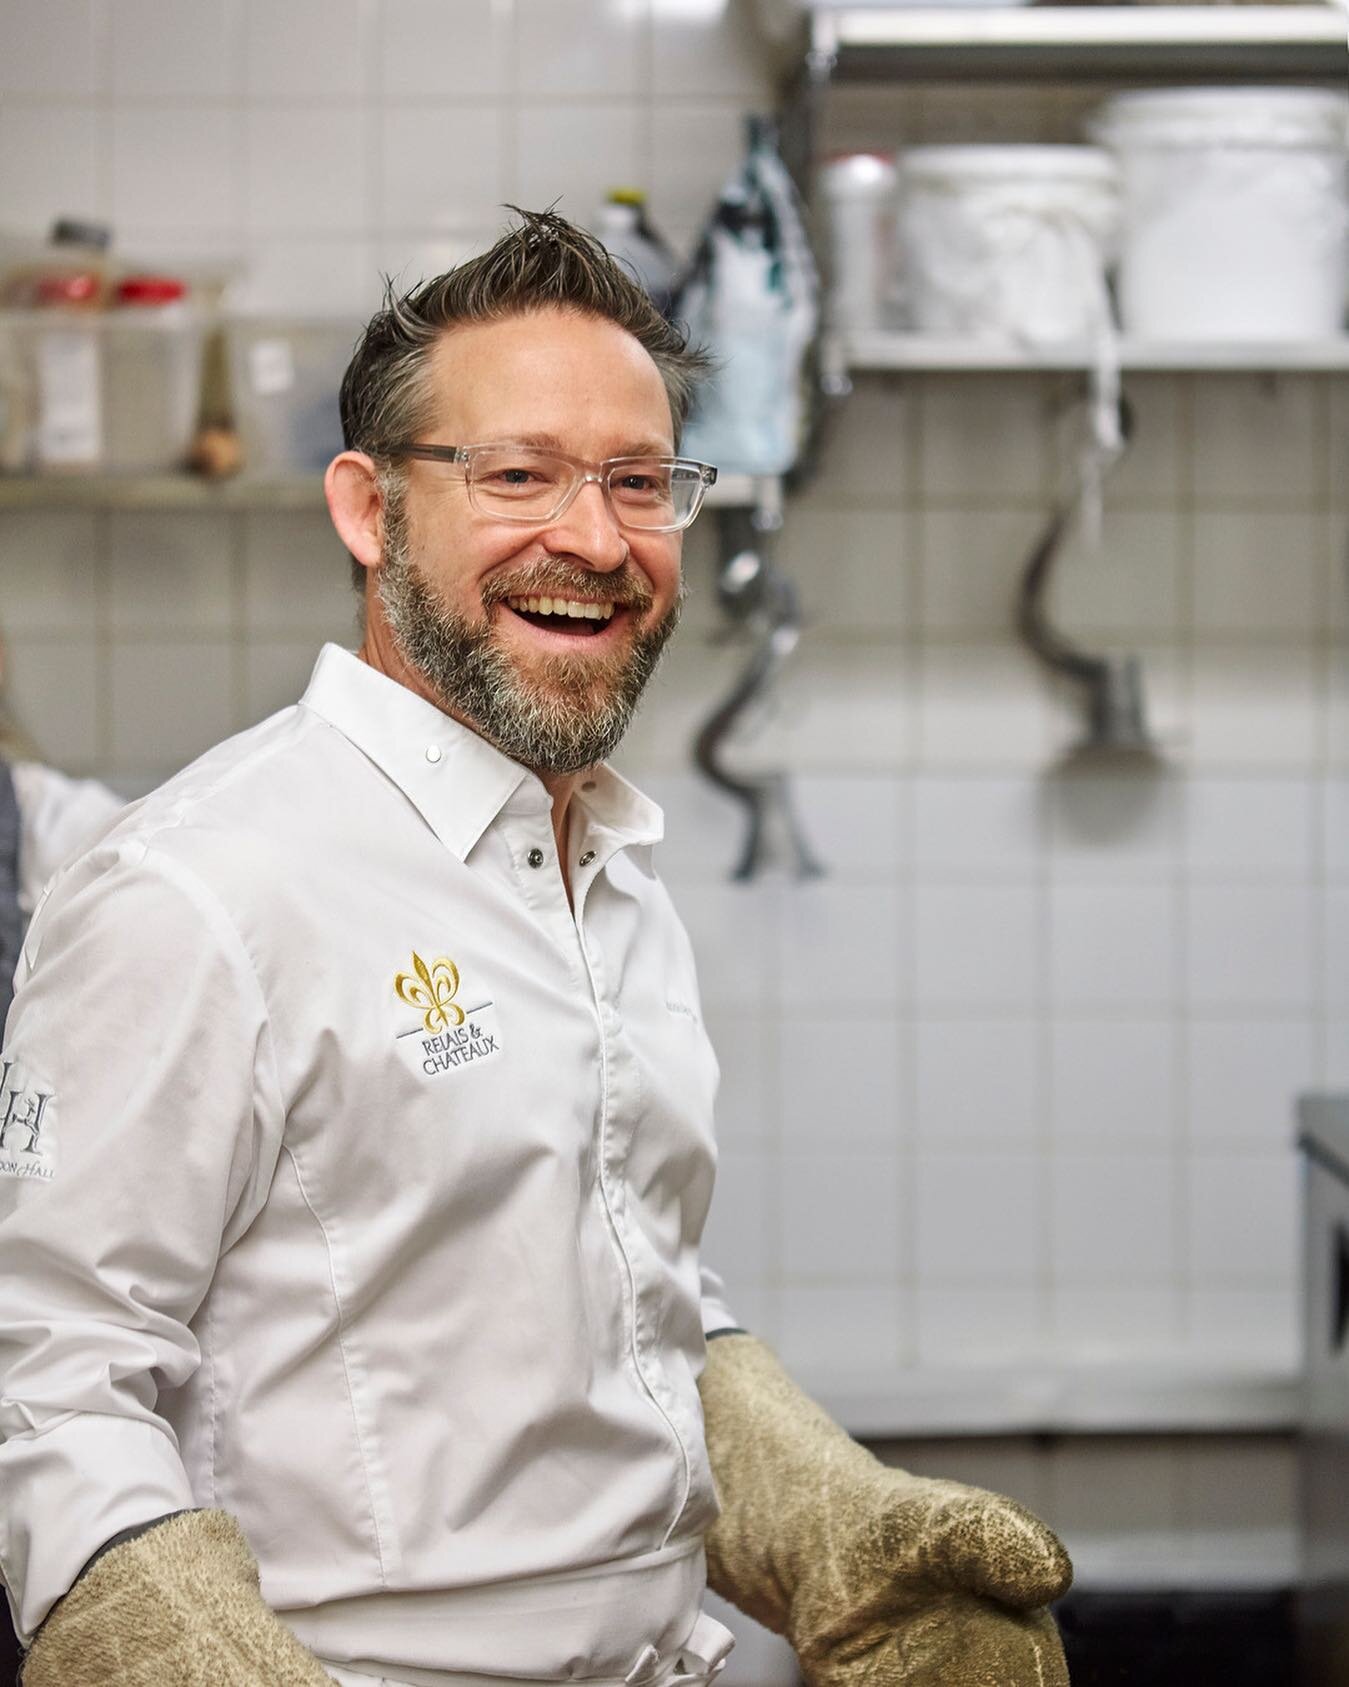 🇨🇦Team Canada Bike to Care en Bourgogne &amp; FdV! 

📣 Meet Jason Bangerter, Executive Chef, Langdon Hall! 
 
Notably an influential leader in the culinary industry, Chef Jason Bangerter&rsquo;s career spans nationally and internationally, working